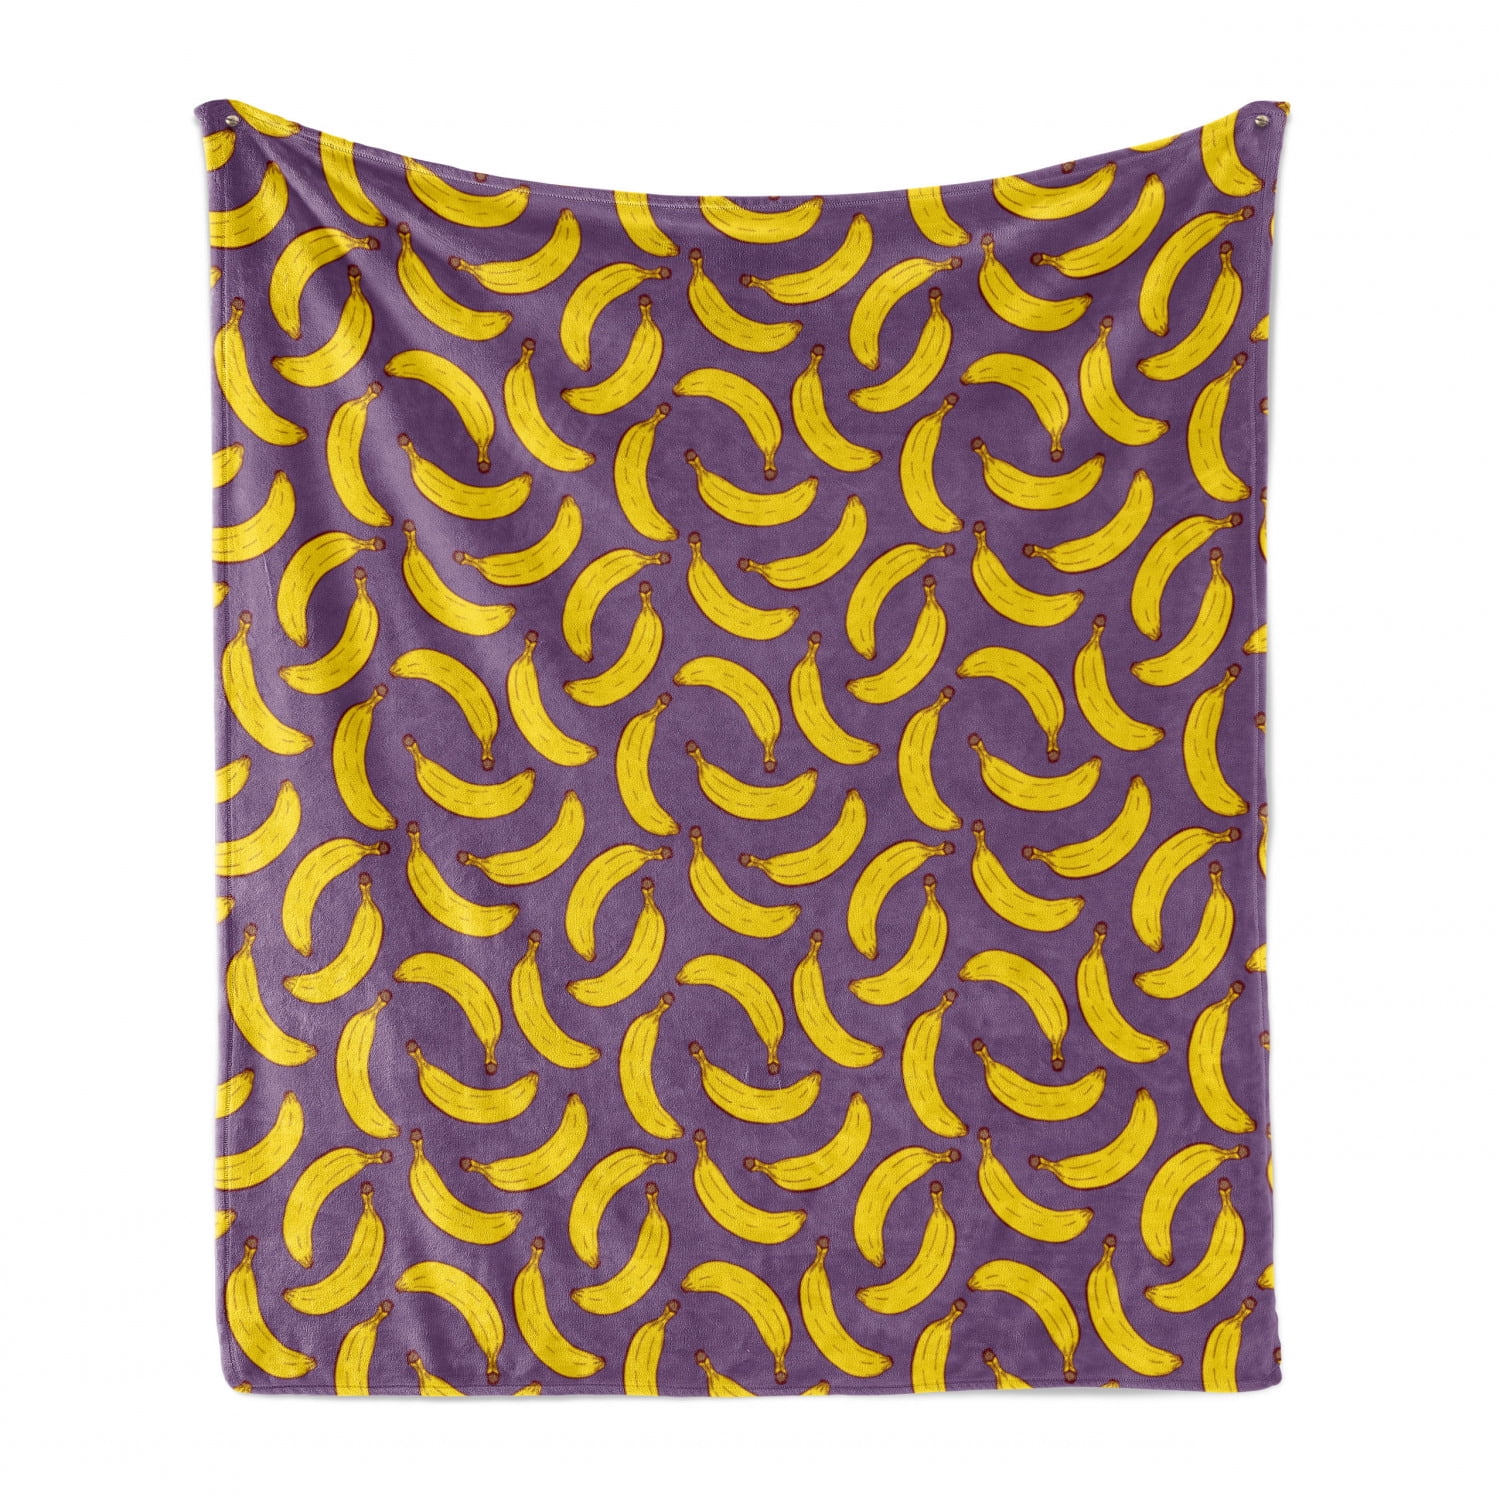 Hand Drawn Repeated Cartoon Banana Fresh Fruit Motifs on Plain Backdrop 50 x 60 Ambesonne Violet Soft Flannel Fleece Throw Blanket Yellow Pale Eggplant Cozy Plush for Indoor and Outdoor Use